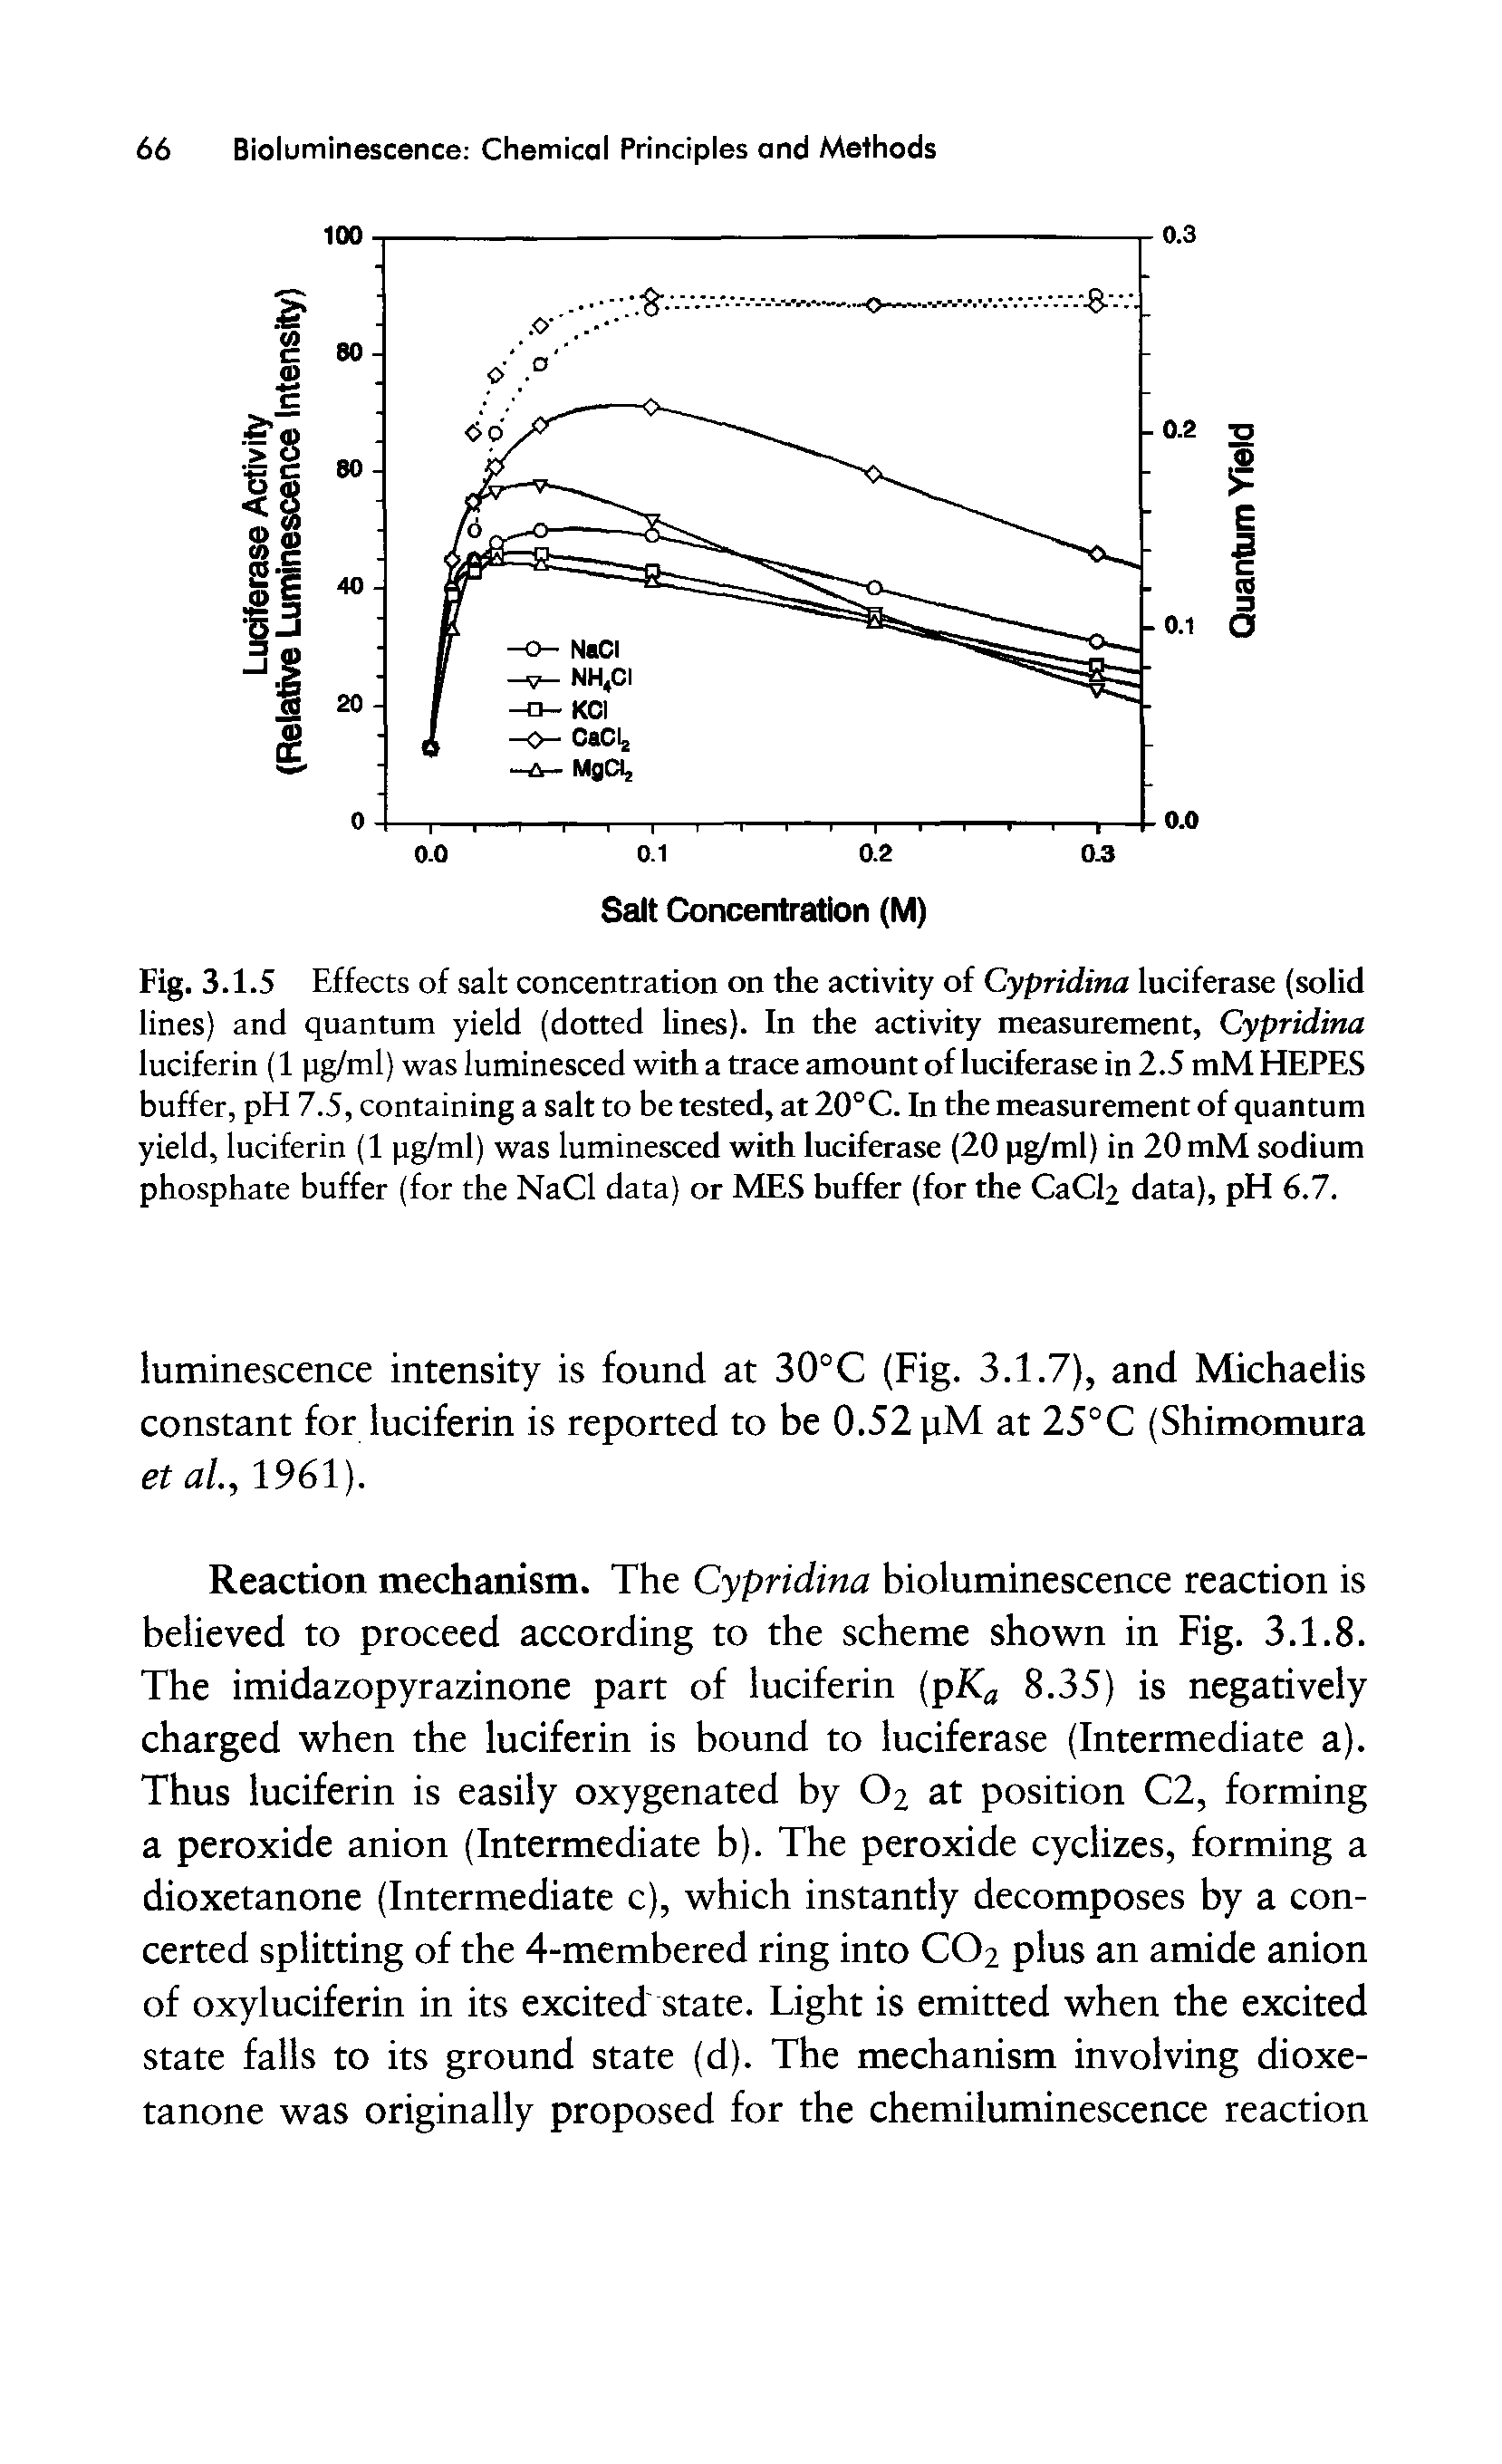 Fig. 3.1.5 Effects of salt concentration on the activity of Cypridina luciferase (solid lines) and quantum yield (dotted lines). In the activity measurement, Cypridina luciferin (1 pg/ml) was luminesced with a trace amount of luciferase in 2.5 mM HEPES buffer, pH 7.5, containing a salt to be tested, at 20°C. In the measurement of quantum yield, luciferin (1 pg/ml) was luminesced with luciferase (20 pg/ml) in 20 mM sodium phosphate buffer (for the NaCl data) or MES buffer (for the CaCl2 data), pH 6.7.